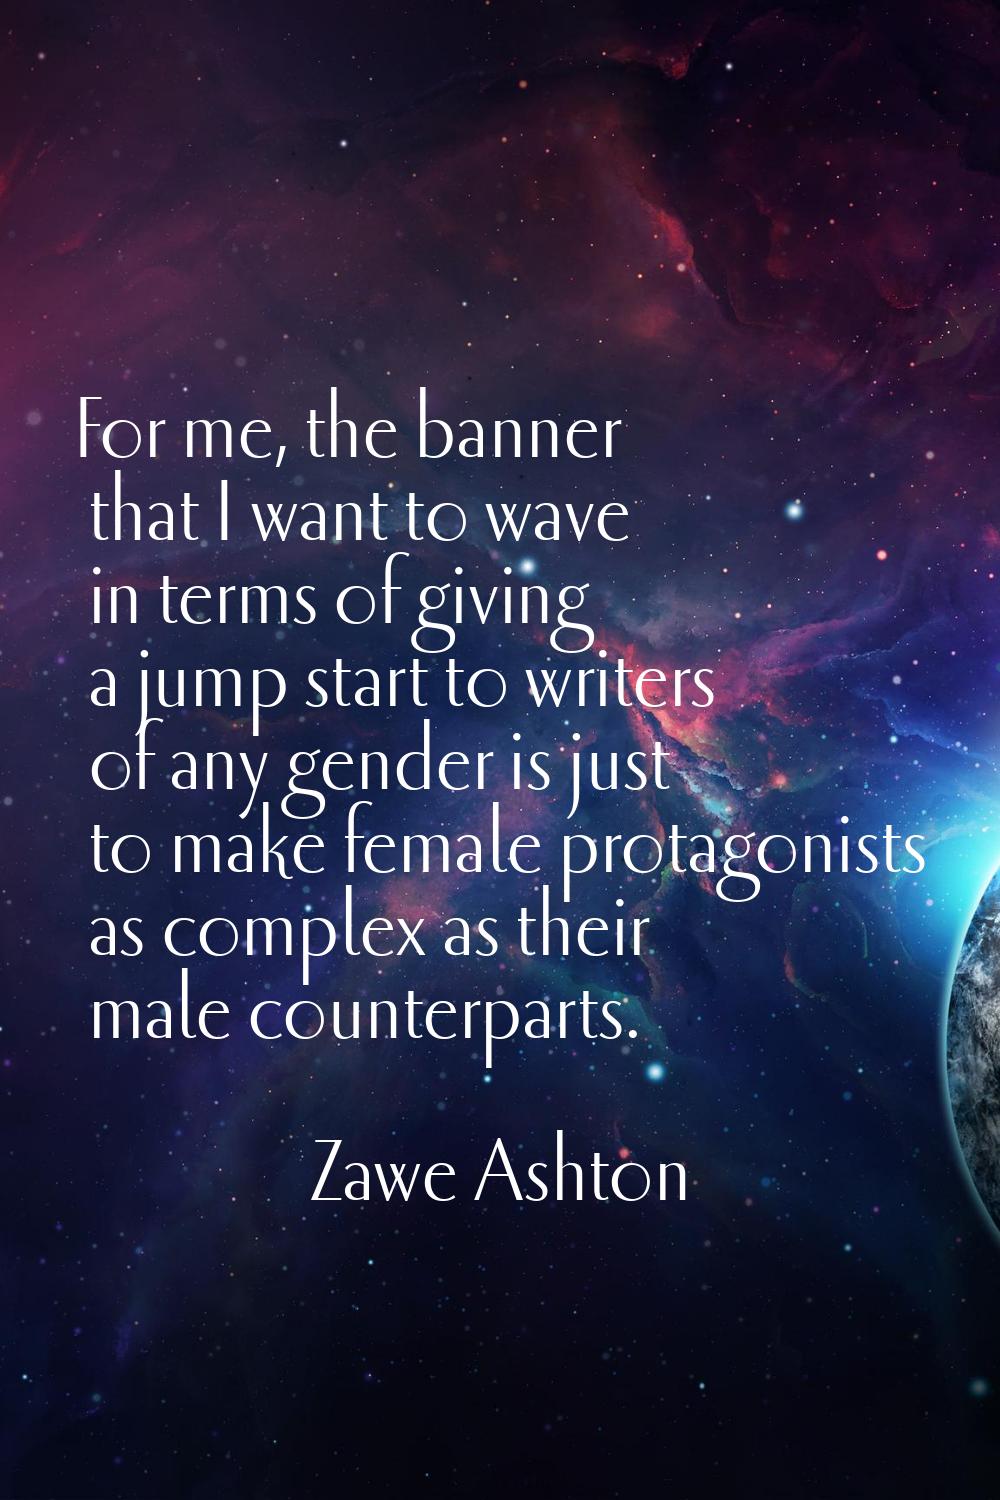 For me, the banner that I want to wave in terms of giving a jump start to writers of any gender is 